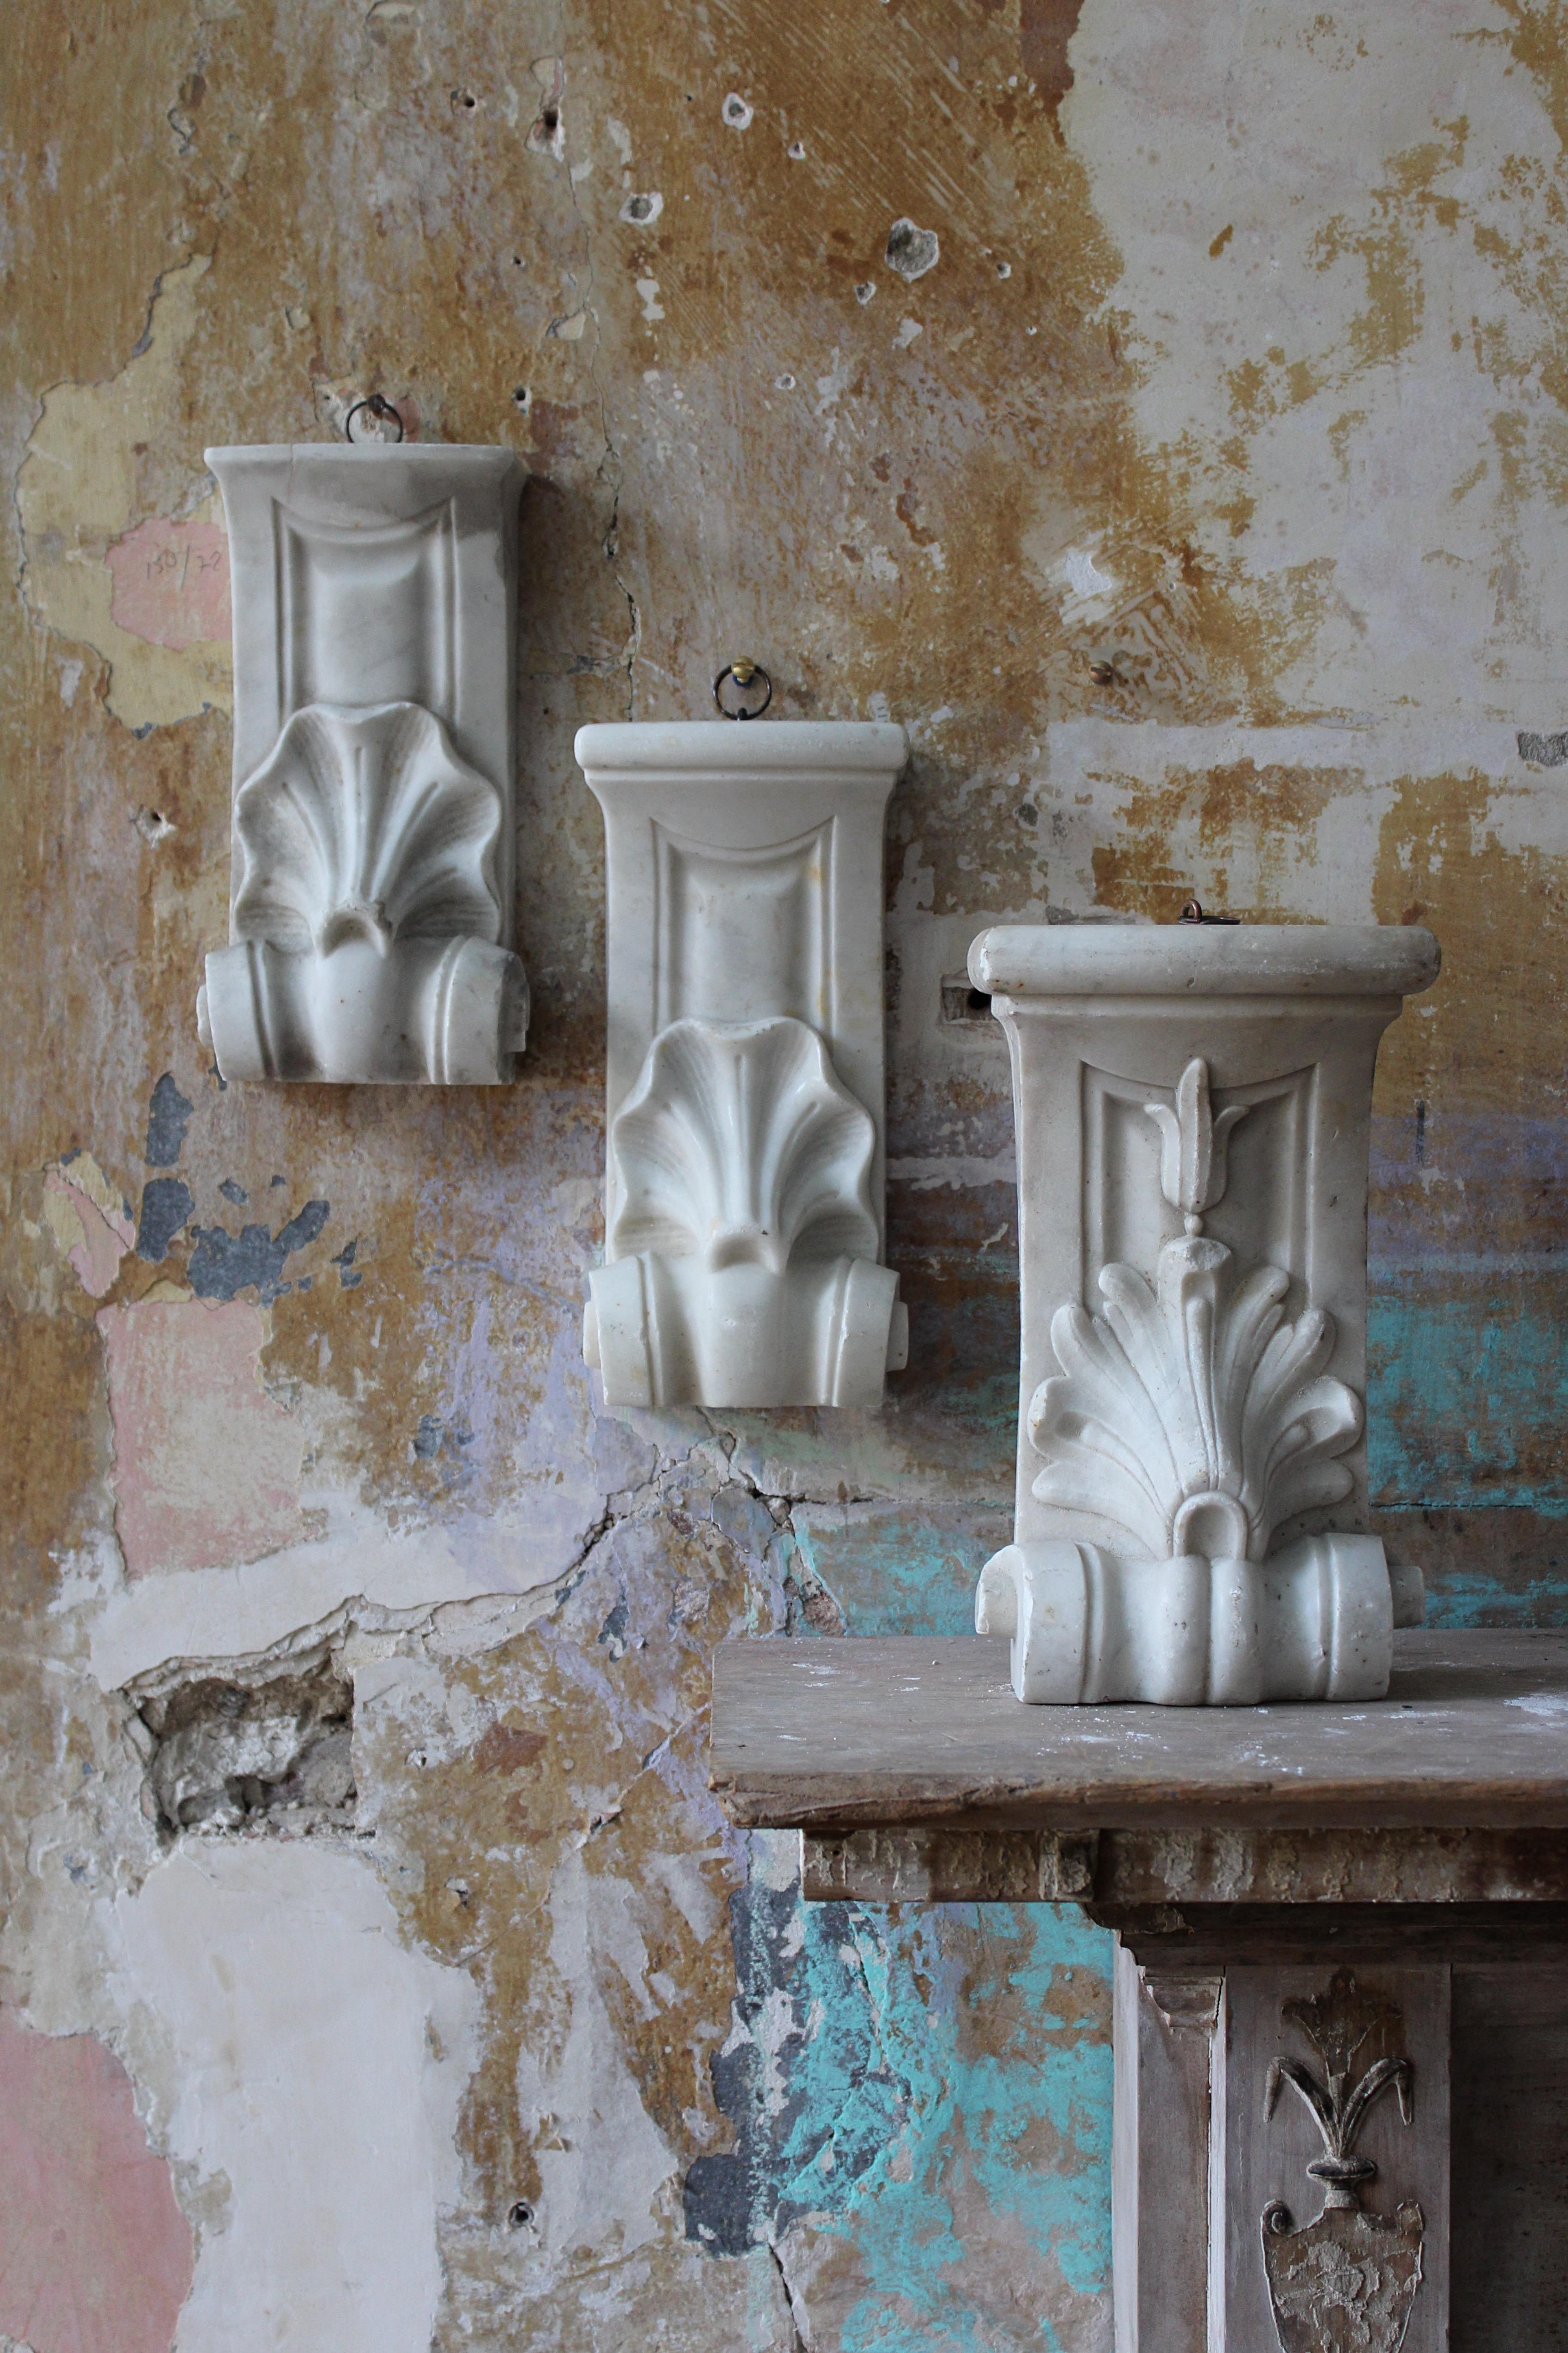 19th century trio of hand carved marble corbels, all with similar organic following decorations and previously part of larger interior architectural feature or fireplace

The sections are extremely well carved, crisp and have a good decorative